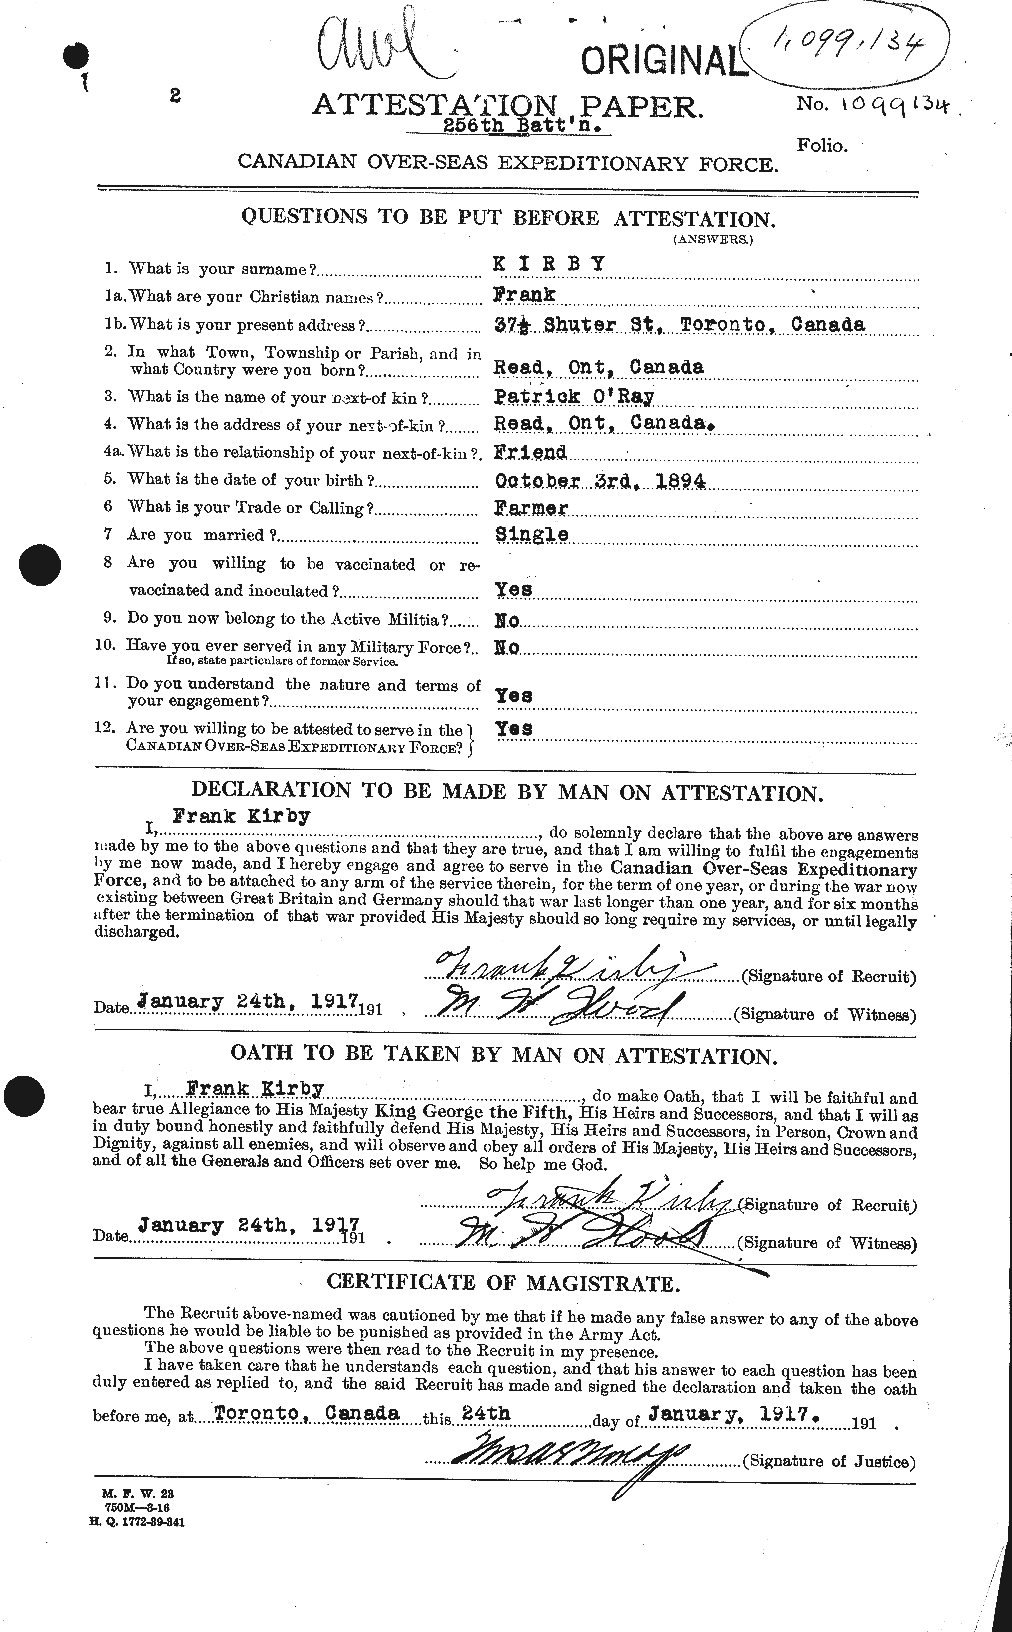 Personnel Records of the First World War - CEF 437183a